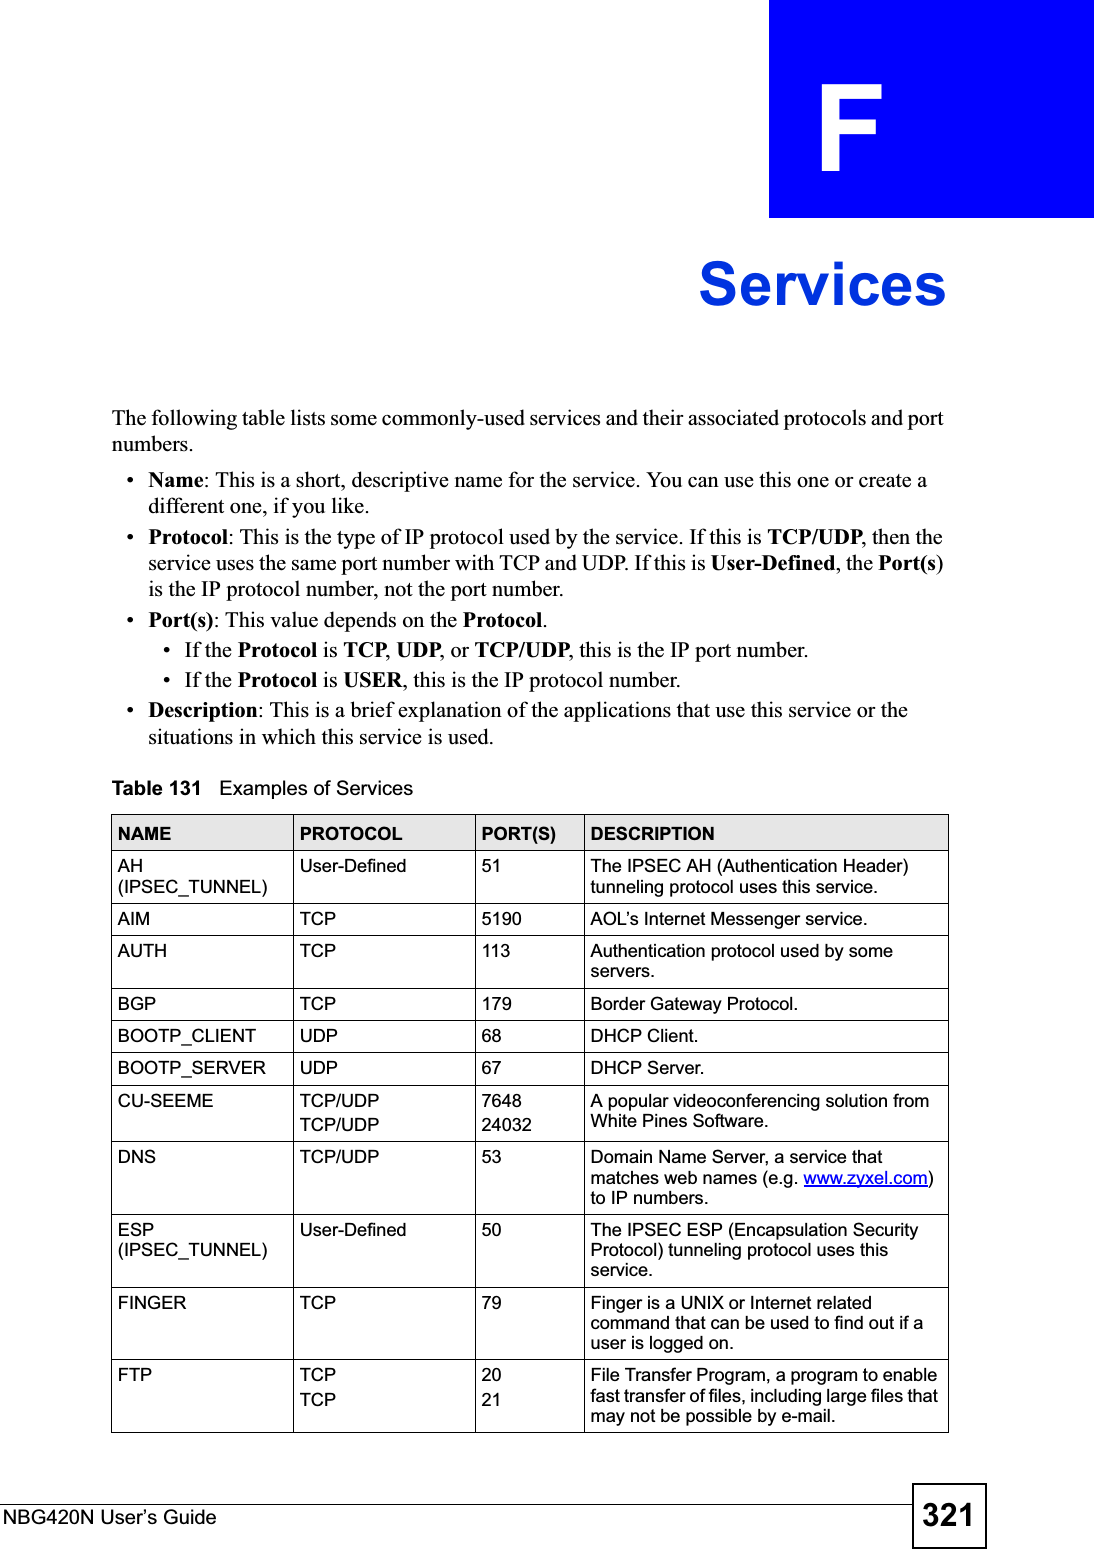 NBG420N User’s Guide 321APPENDIX  F ServicesThe following table lists some commonly-used services and their associated protocols and port numbers.•Name: This is a short, descriptive name for the service. You can use this one or create a different one, if you like.•Protocol: This is the type of IP protocol used by the service. If this is TCP/UDP, then the service uses the same port number with TCP and UDP. If this is User-Defined, the Port(s)is the IP protocol number, not the port number.•Port(s): This value depends on the Protocol.• If the Protocol is TCP,UDP, or TCP/UDP, this is the IP port number.• If the Protocol is USER, this is the IP protocol number.•Description: This is a brief explanation of the applications that use this service or the situations in which this service is used.Table 131   Examples of ServicesNAME PROTOCOL PORT(S) DESCRIPTIONAH(IPSEC_TUNNEL)User-Defined 51 The IPSEC AH (Authentication Header) tunneling protocol uses this service.AIM TCP 5190 AOL’s Internet Messenger service.AUTH TCP 113 Authentication protocol used by some servers.BGP TCP 179 Border Gateway Protocol.BOOTP_CLIENT UDP 68 DHCP Client.BOOTP_SERVER UDP 67 DHCP Server.CU-SEEME TCP/UDPTCP/UDP 764824032A popular videoconferencing solution from White Pines Software.DNS TCP/UDP 53 Domain Name Server, a service that matches web names (e.g. www.zyxel.com)to IP numbers.ESP(IPSEC_TUNNEL)User-Defined 50 The IPSEC ESP (Encapsulation Security Protocol) tunneling protocol uses this service.FINGER TCP 79 Finger is a UNIX or Internet related command that can be used to find out if a user is logged on.FTP TCPTCP2021File Transfer Program, a program to enable fast transfer of files, including large files that may not be possible by e-mail.